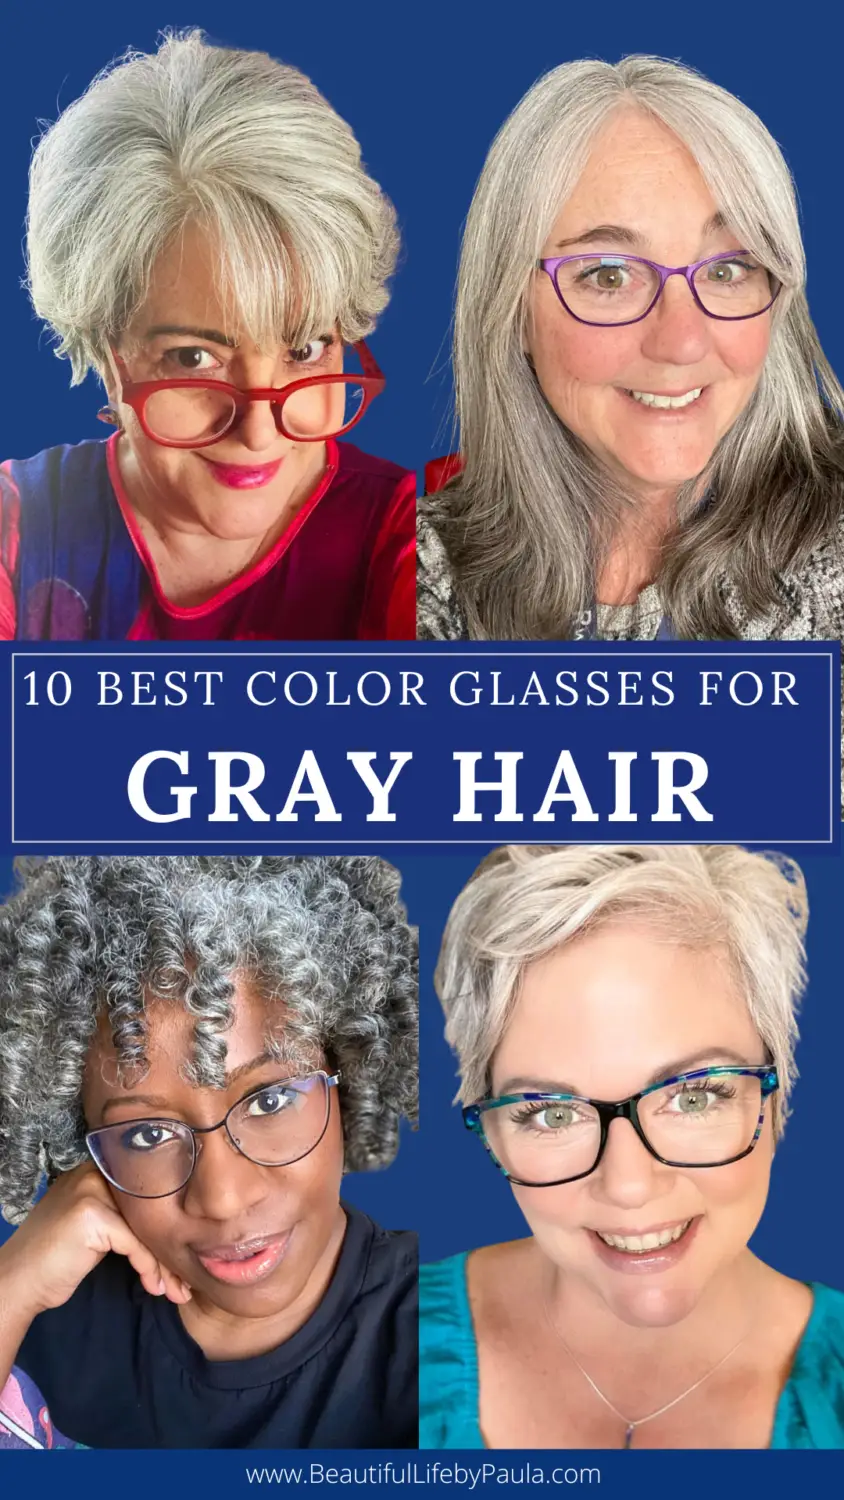 color glasses gray hair